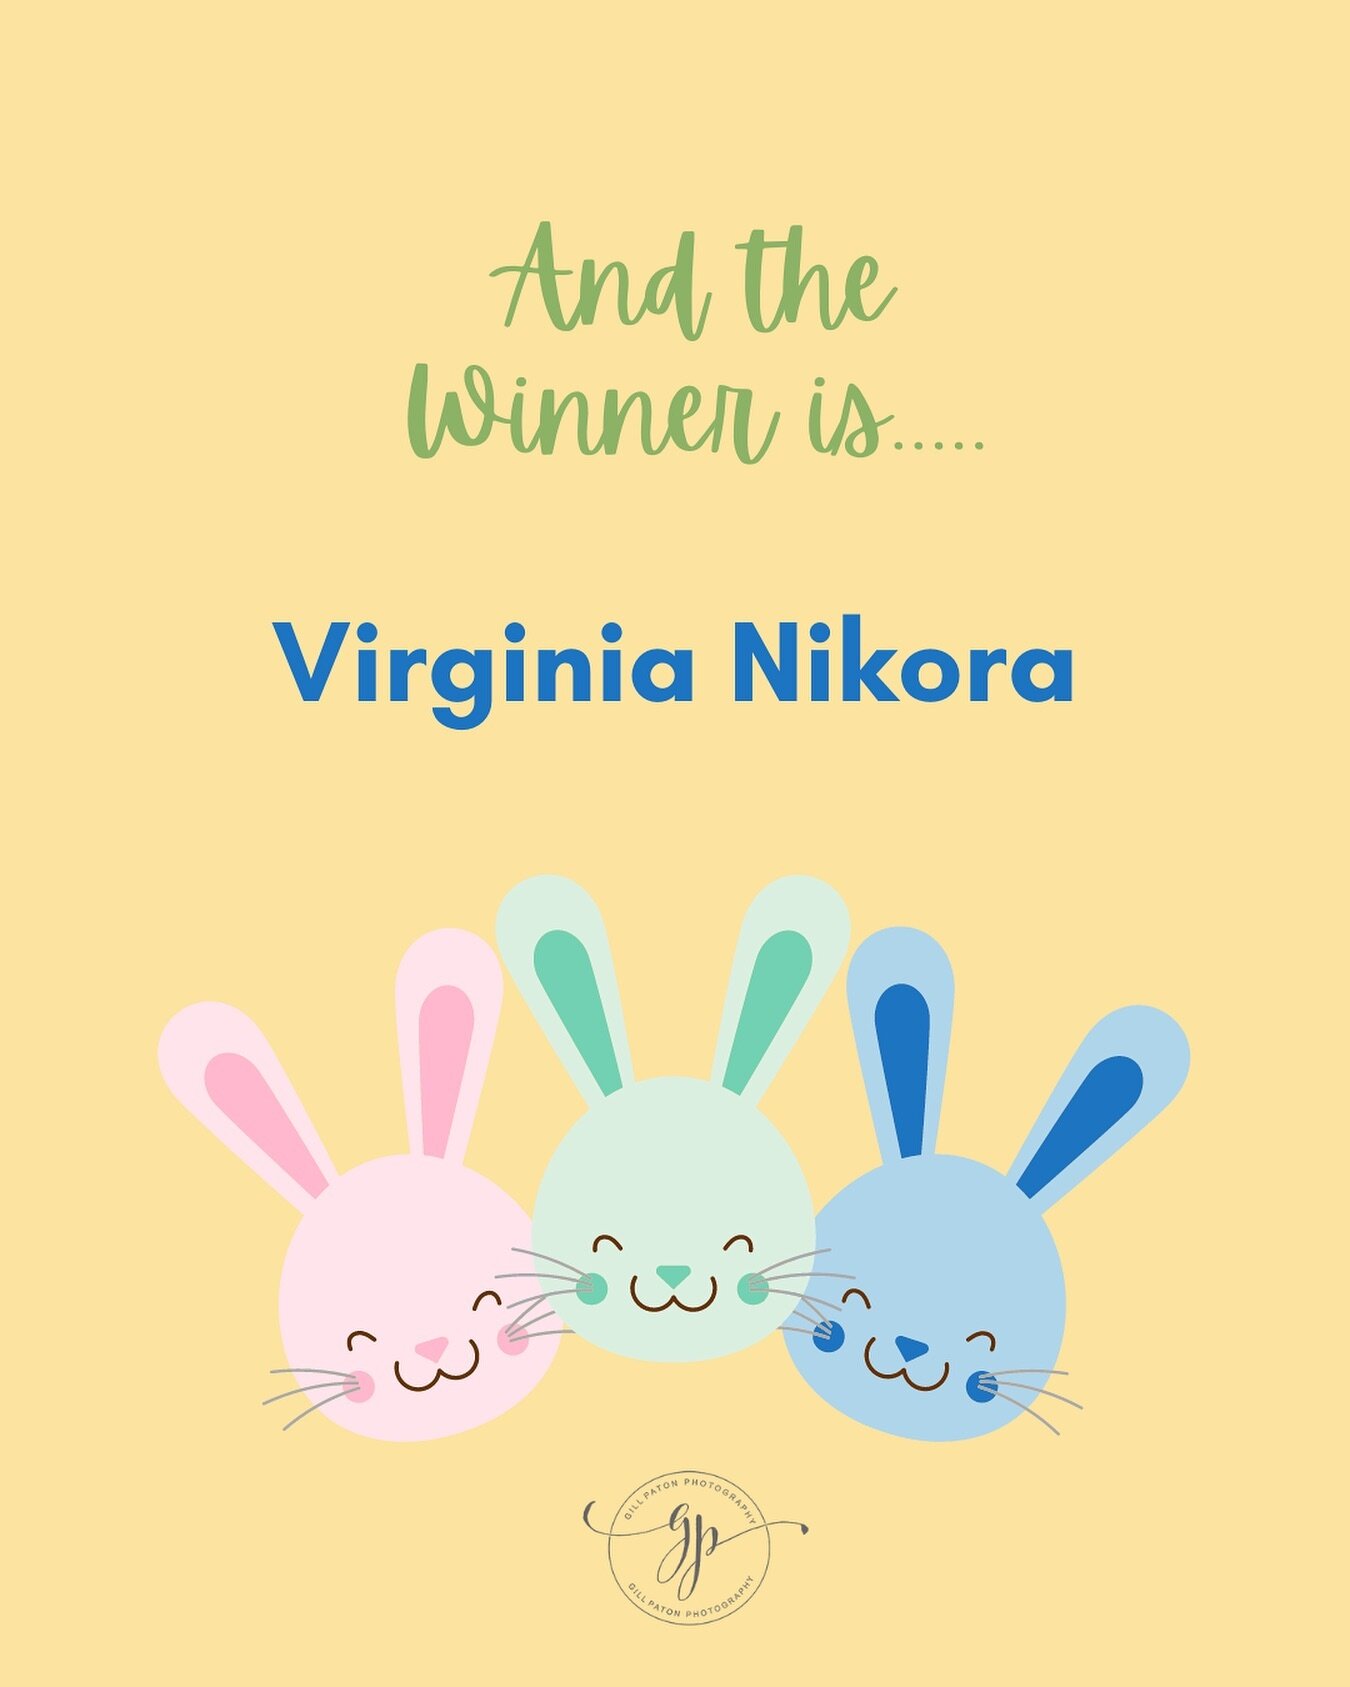 Congratulations Virginia! You are the lucky Winner of the Easter Mini Session! 
Thanks to everyone who entered. Have a great Easter weekend 🐰